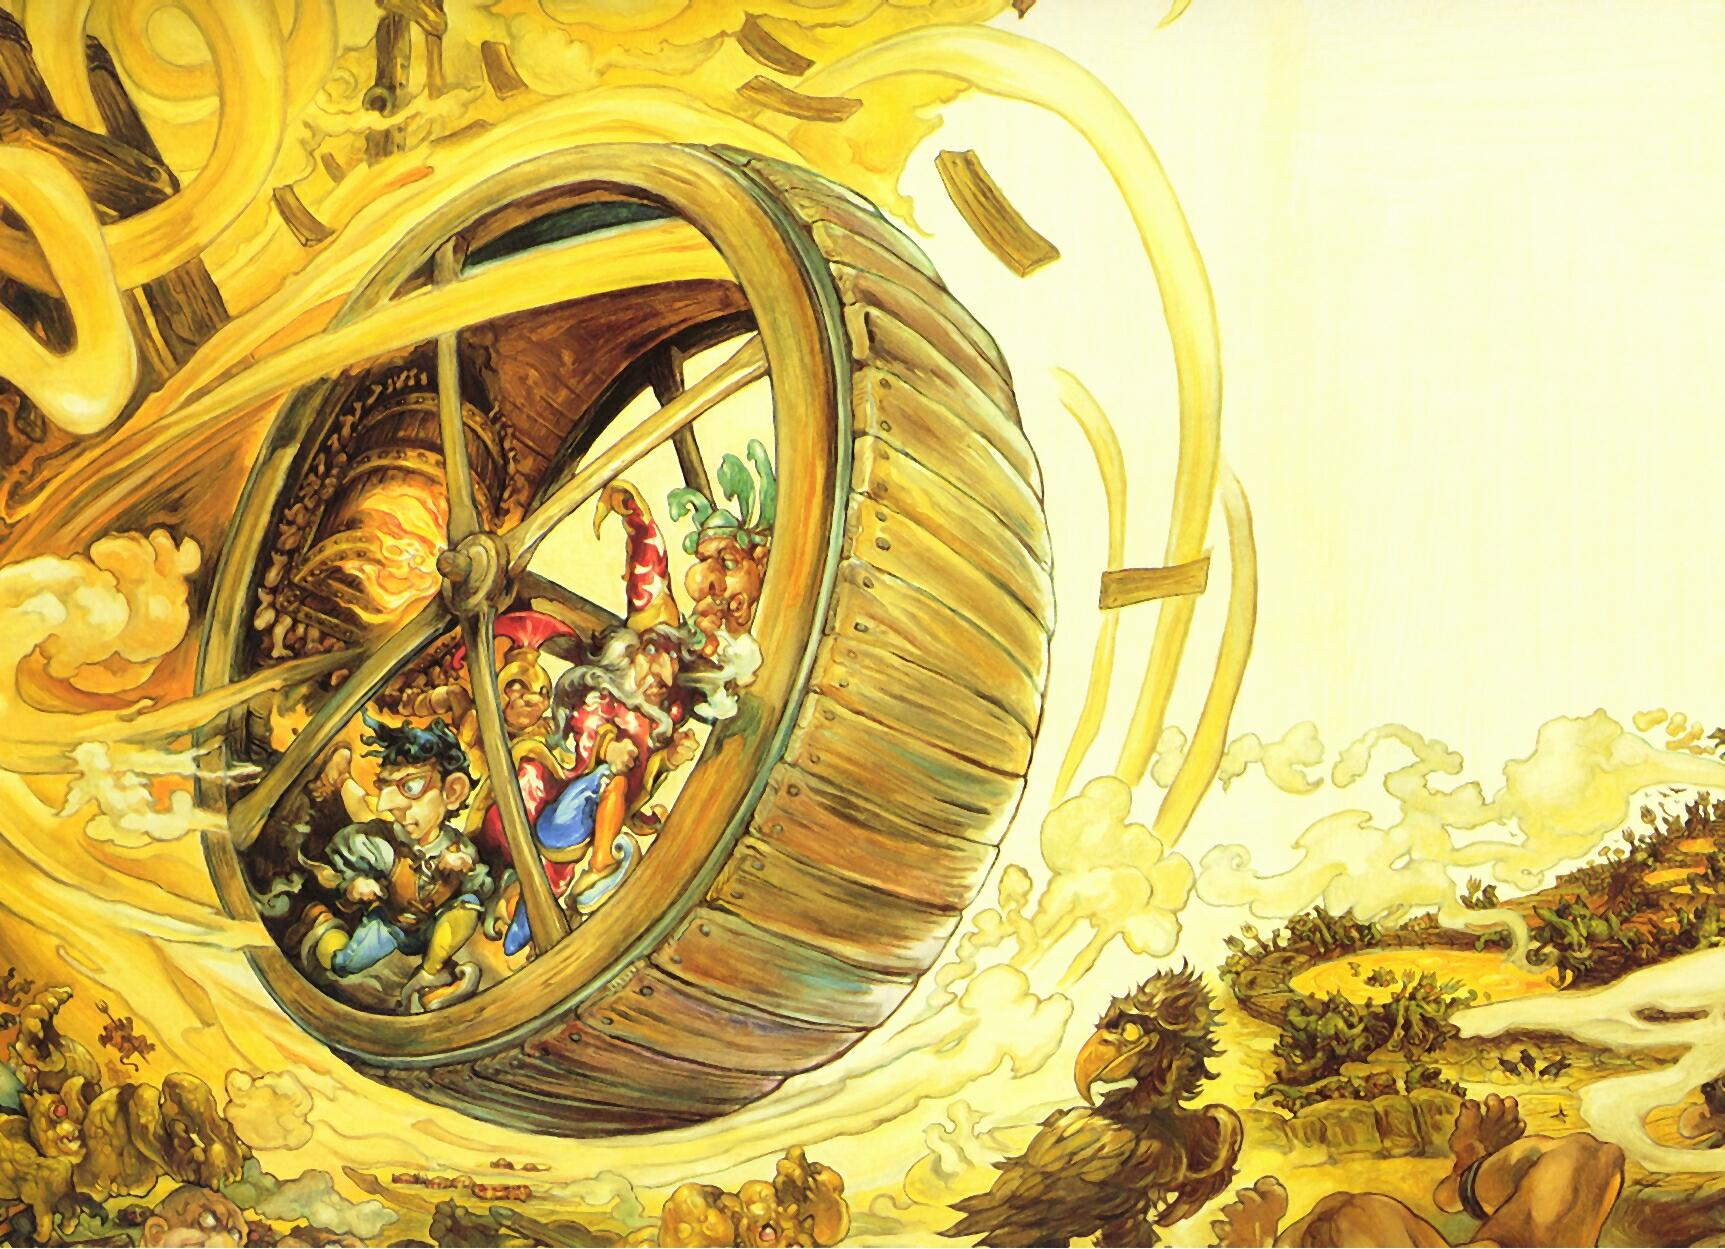 Colorful sci-fi artwork by Josh Kirby depicting a vivid and dynamic landscape